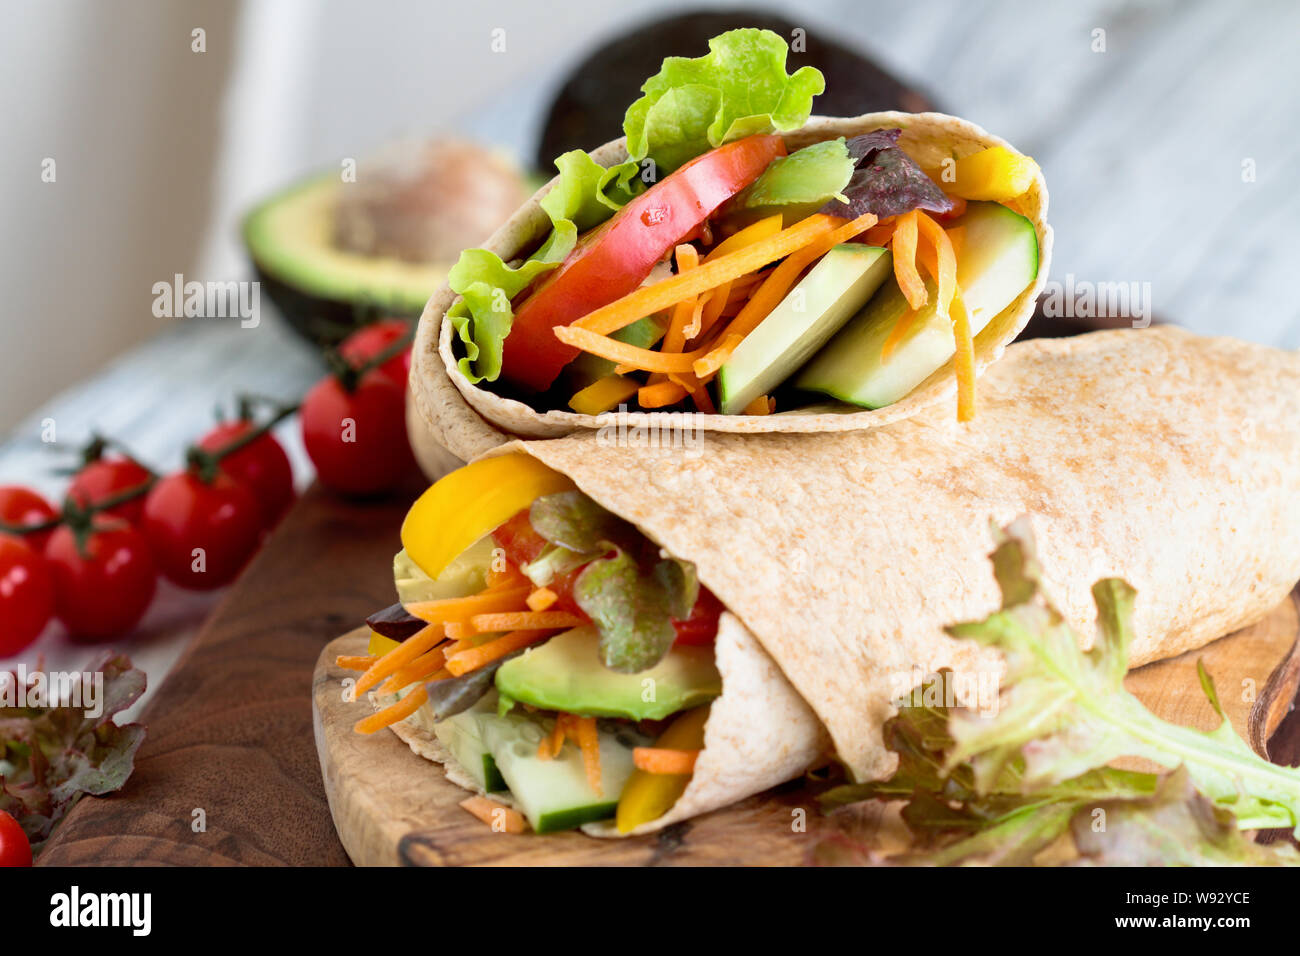 A healthy lunch or dinner of a vegan / vegetarian wrap made with  argula lettuce, sliced tomatoes, cucumbers, avocado, bell peppers and carrots. Stock Photo